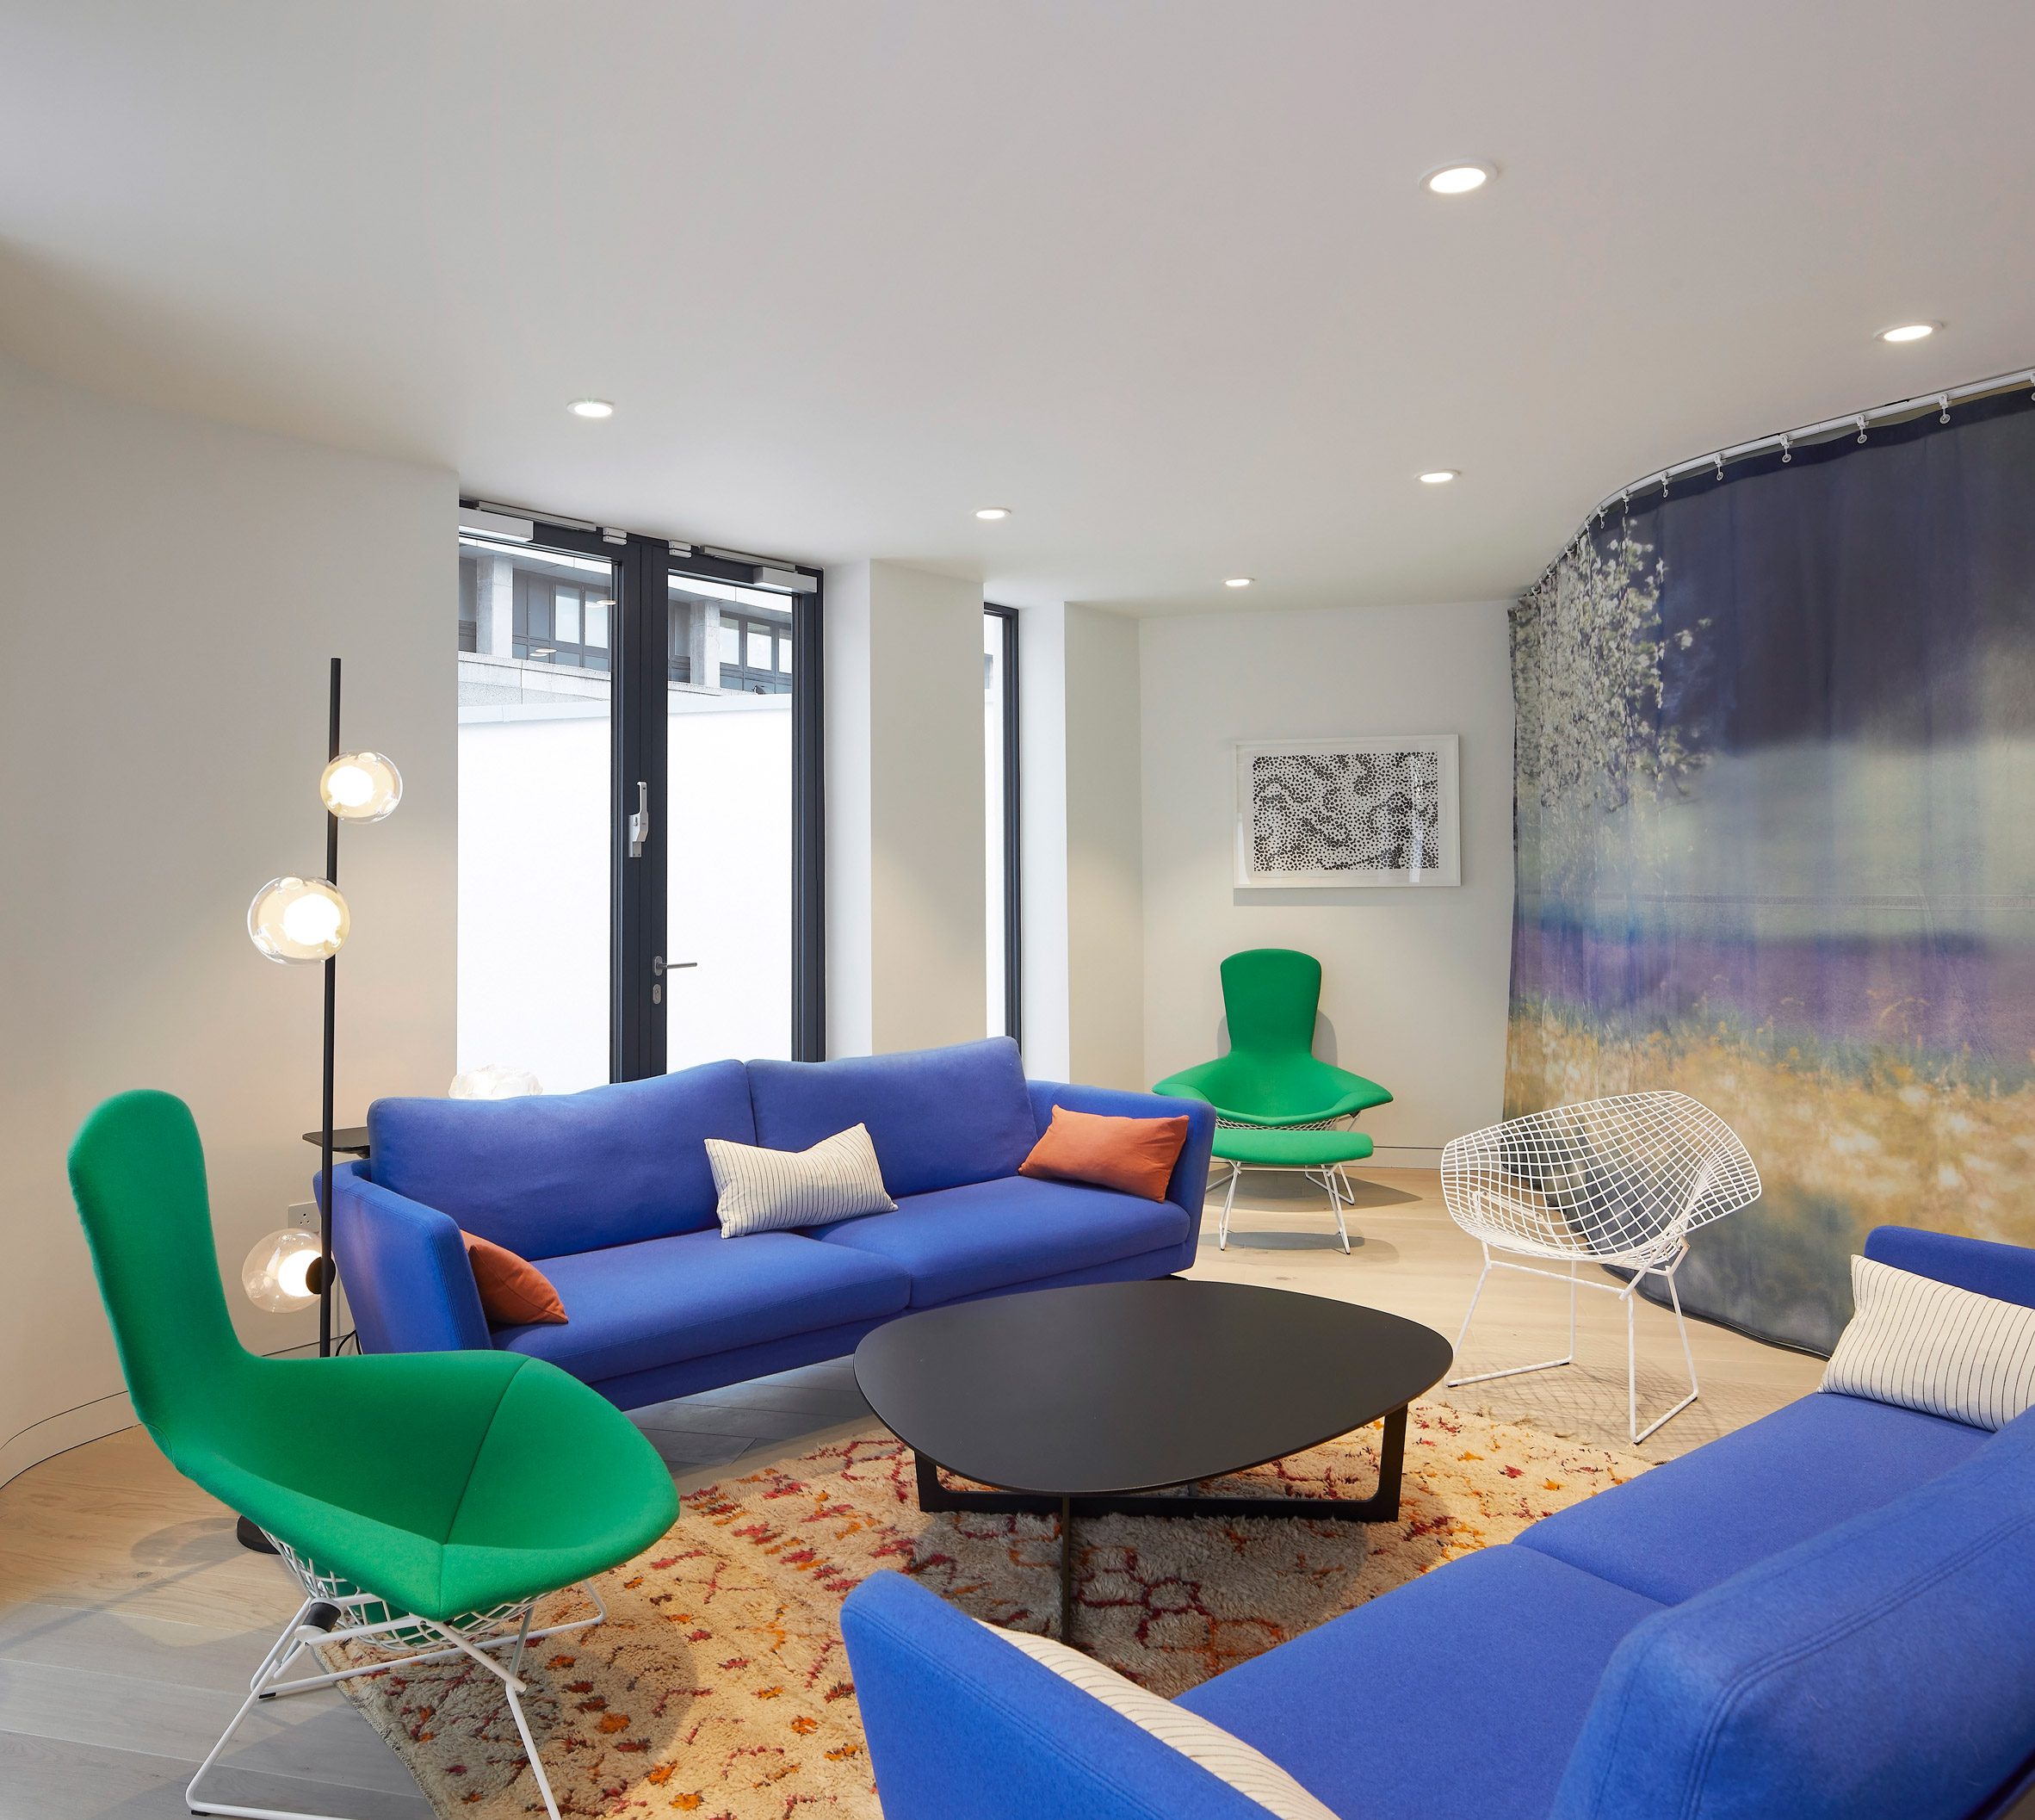 Lounge area with blue and green seating